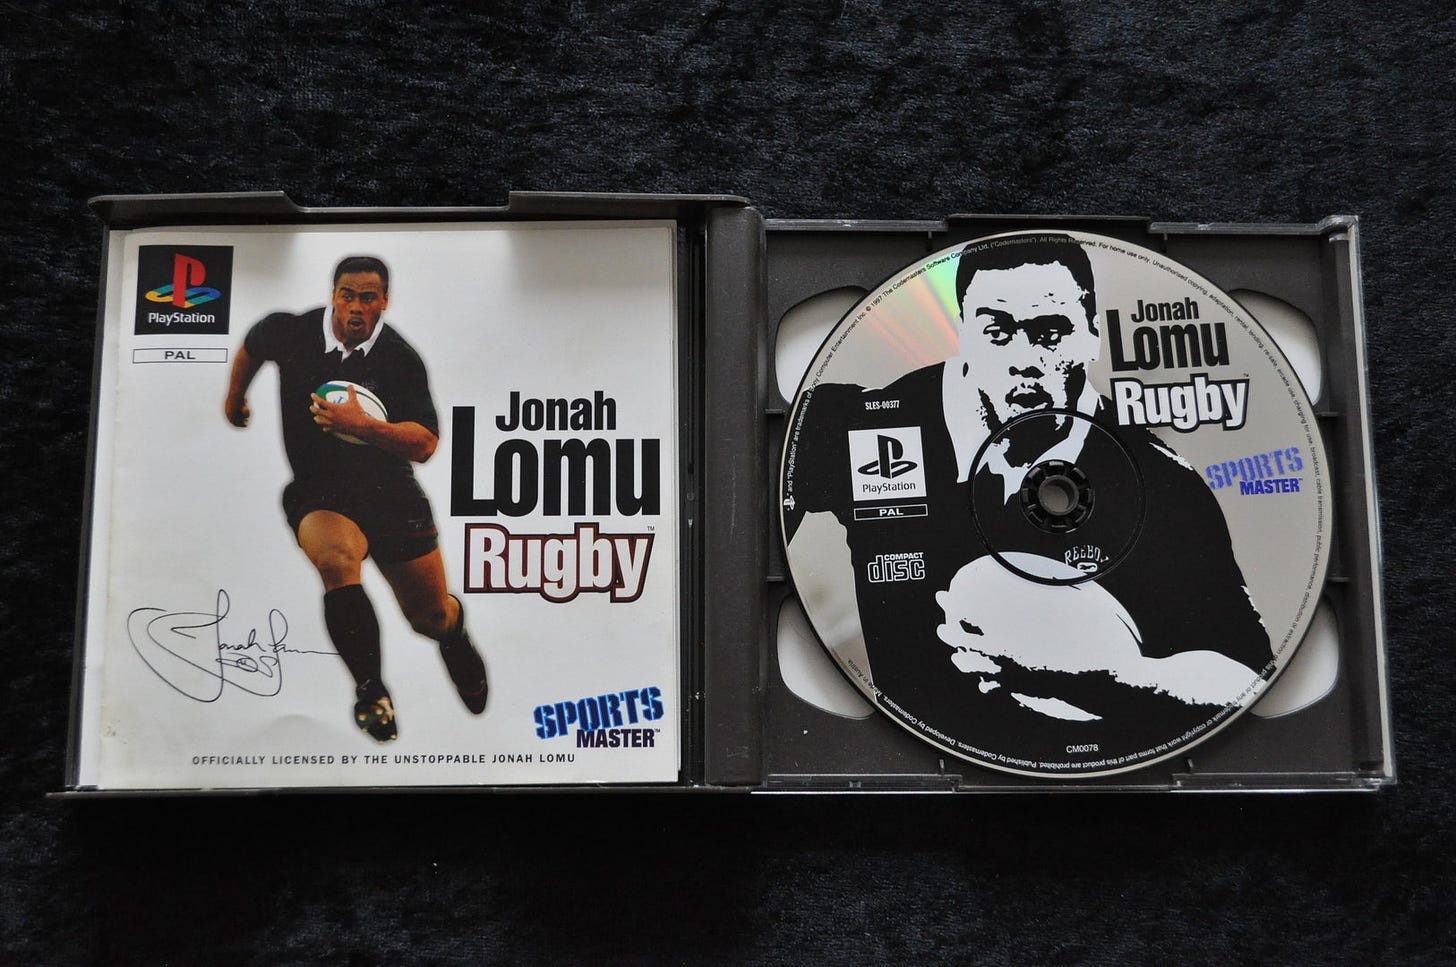 Jonah Lomu Rugby Playstation 1 PS1 - Retrogameking.com |  Retro,Games,Consoles,Collectables